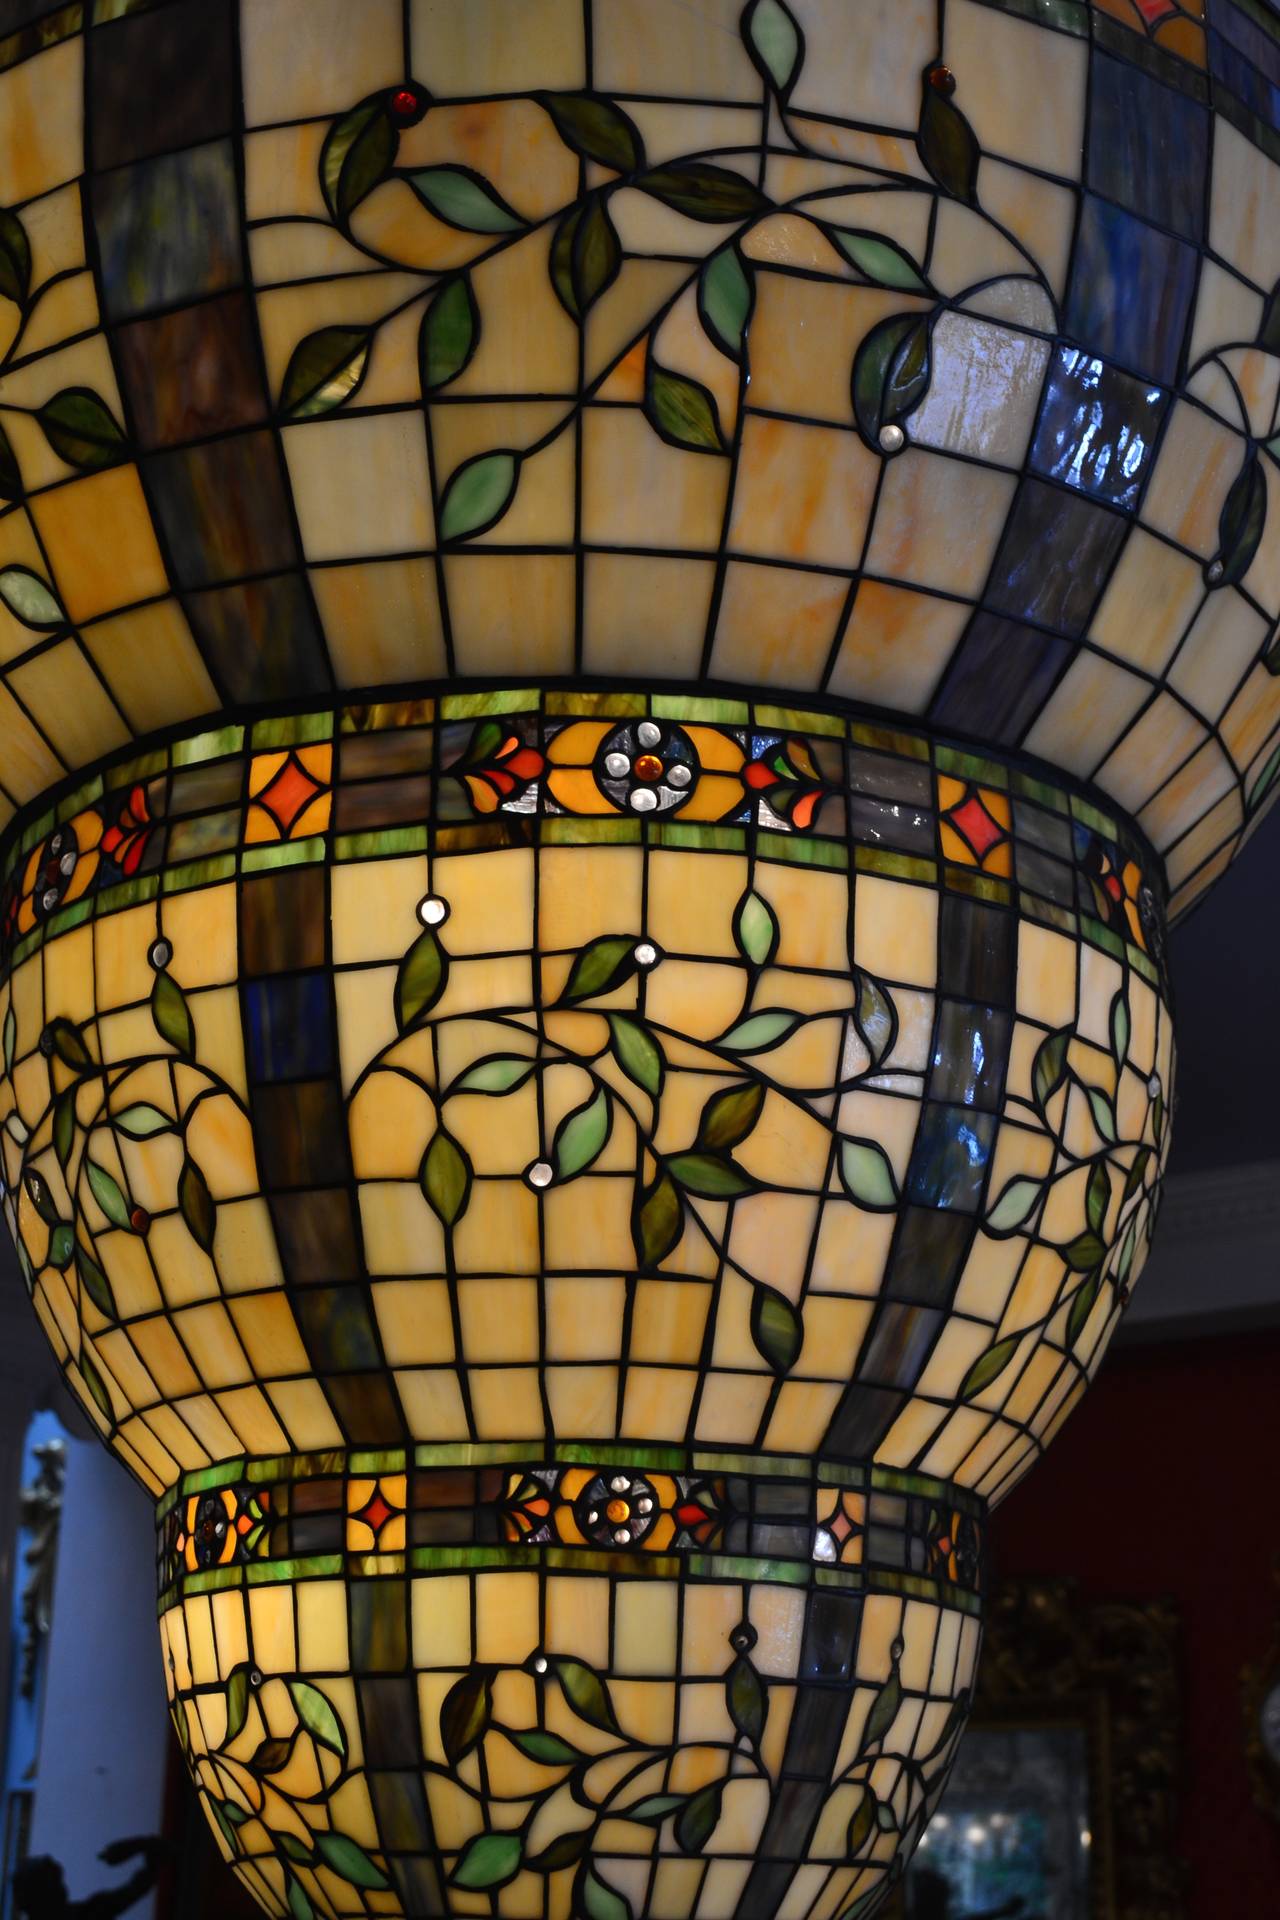 A wonderful ceiling fixture for the right locale. Three circular tiers of stained glass are suspended from six curved metal supports, each tier separated by a band of colorful rosettes and flowers, the tiers decorated in the round with branches and